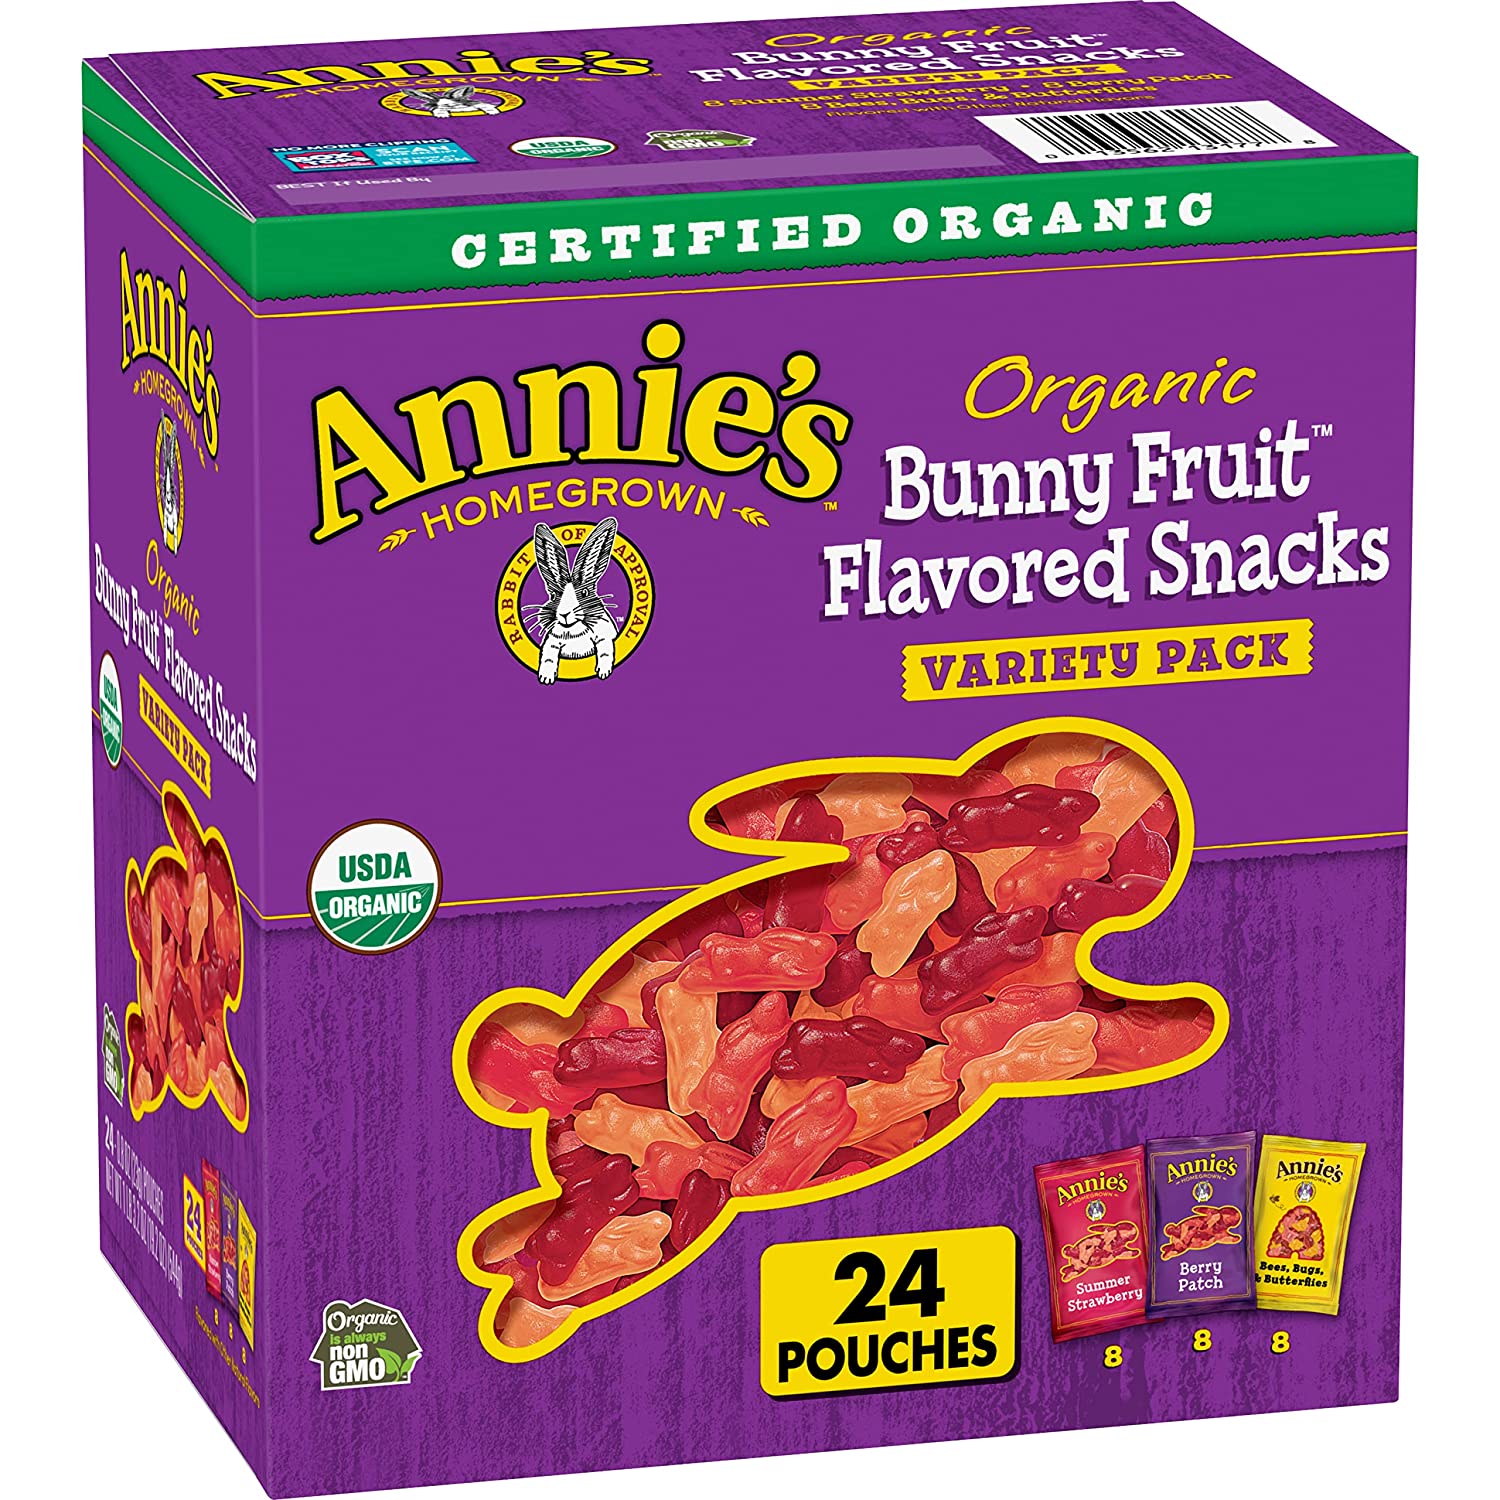 24-Count 0.8-Oz Annie's Organic Bunny Fruit Snack Pouches (Variety Pack) $8.21 w/ S&S + Free Shipping w/ Prime or on orders $25+